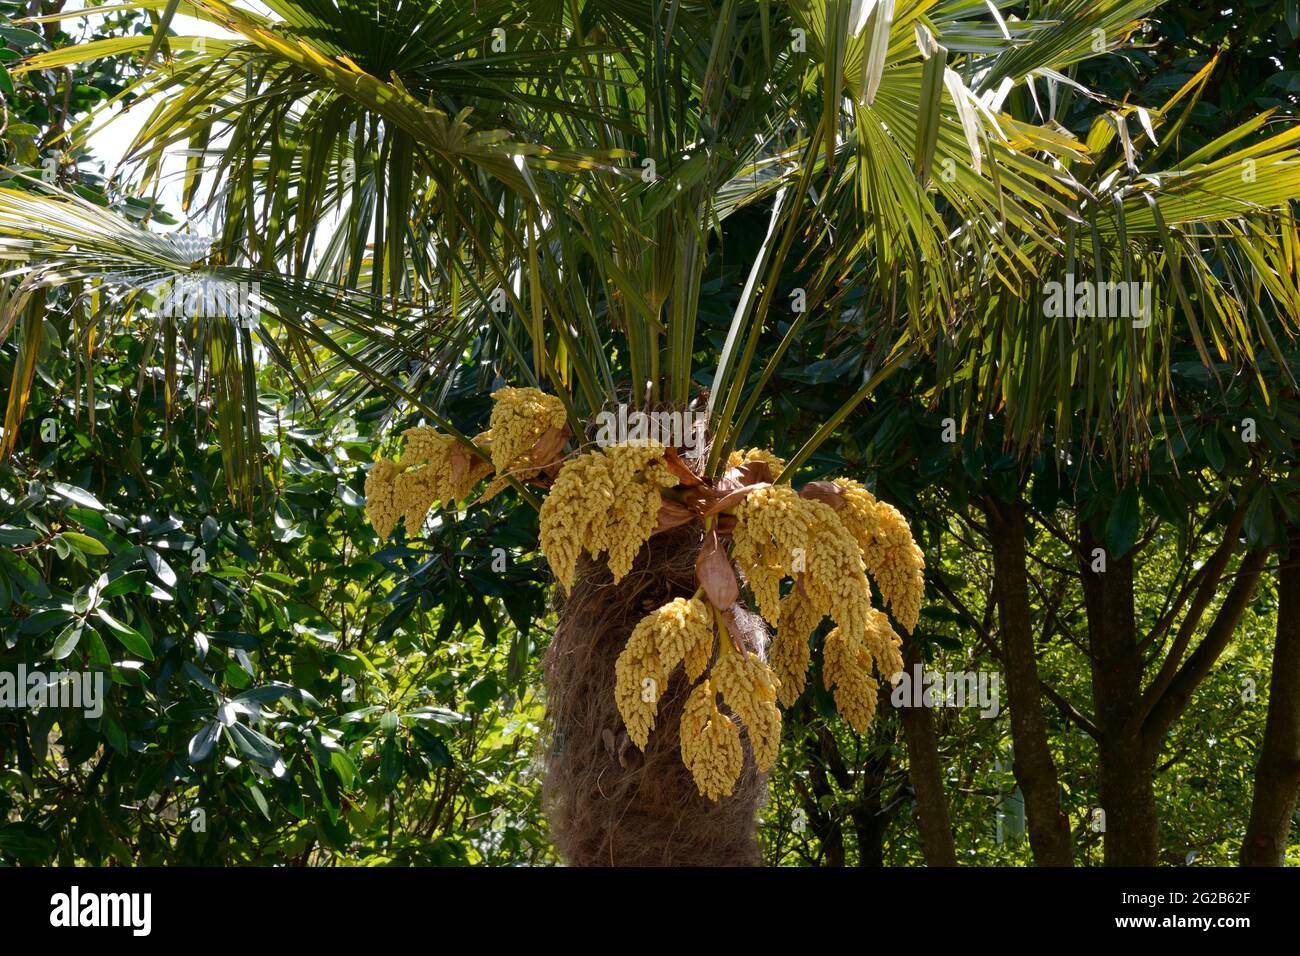 Trachycarpus fortunei Chusan palm fibre covered bark and large arches of pale yellow flowers Stock Photo